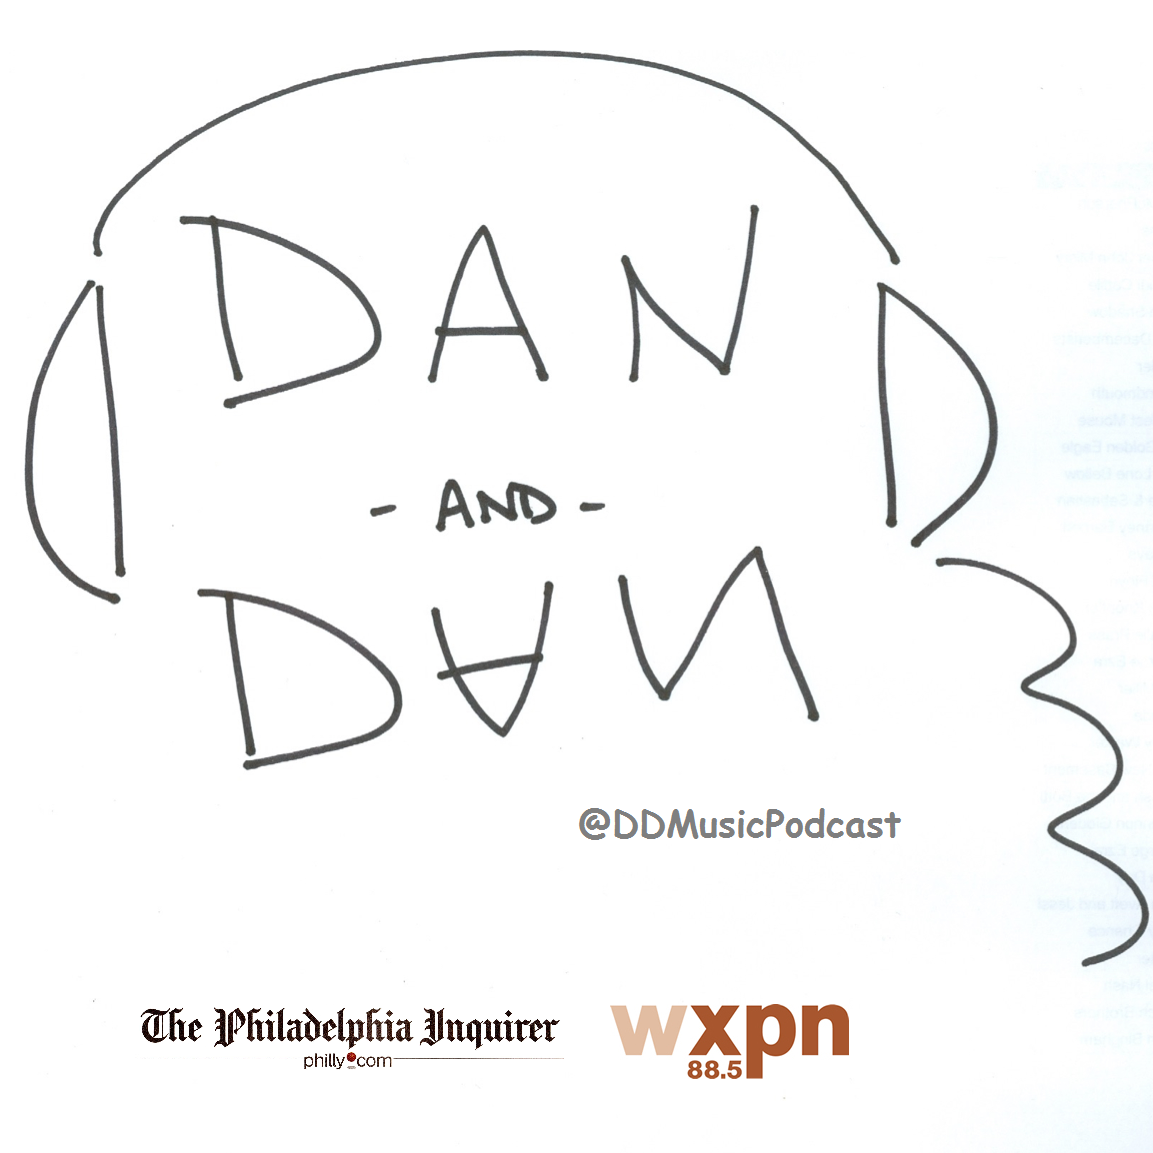 Dan Reed, MusicDirector & Afternoon Host at WXPN/Philly and Dan DeLuca, Music Critic & Columnist for the Philadelphia Inquirer sit down bi-weekly to talk MUSIC!